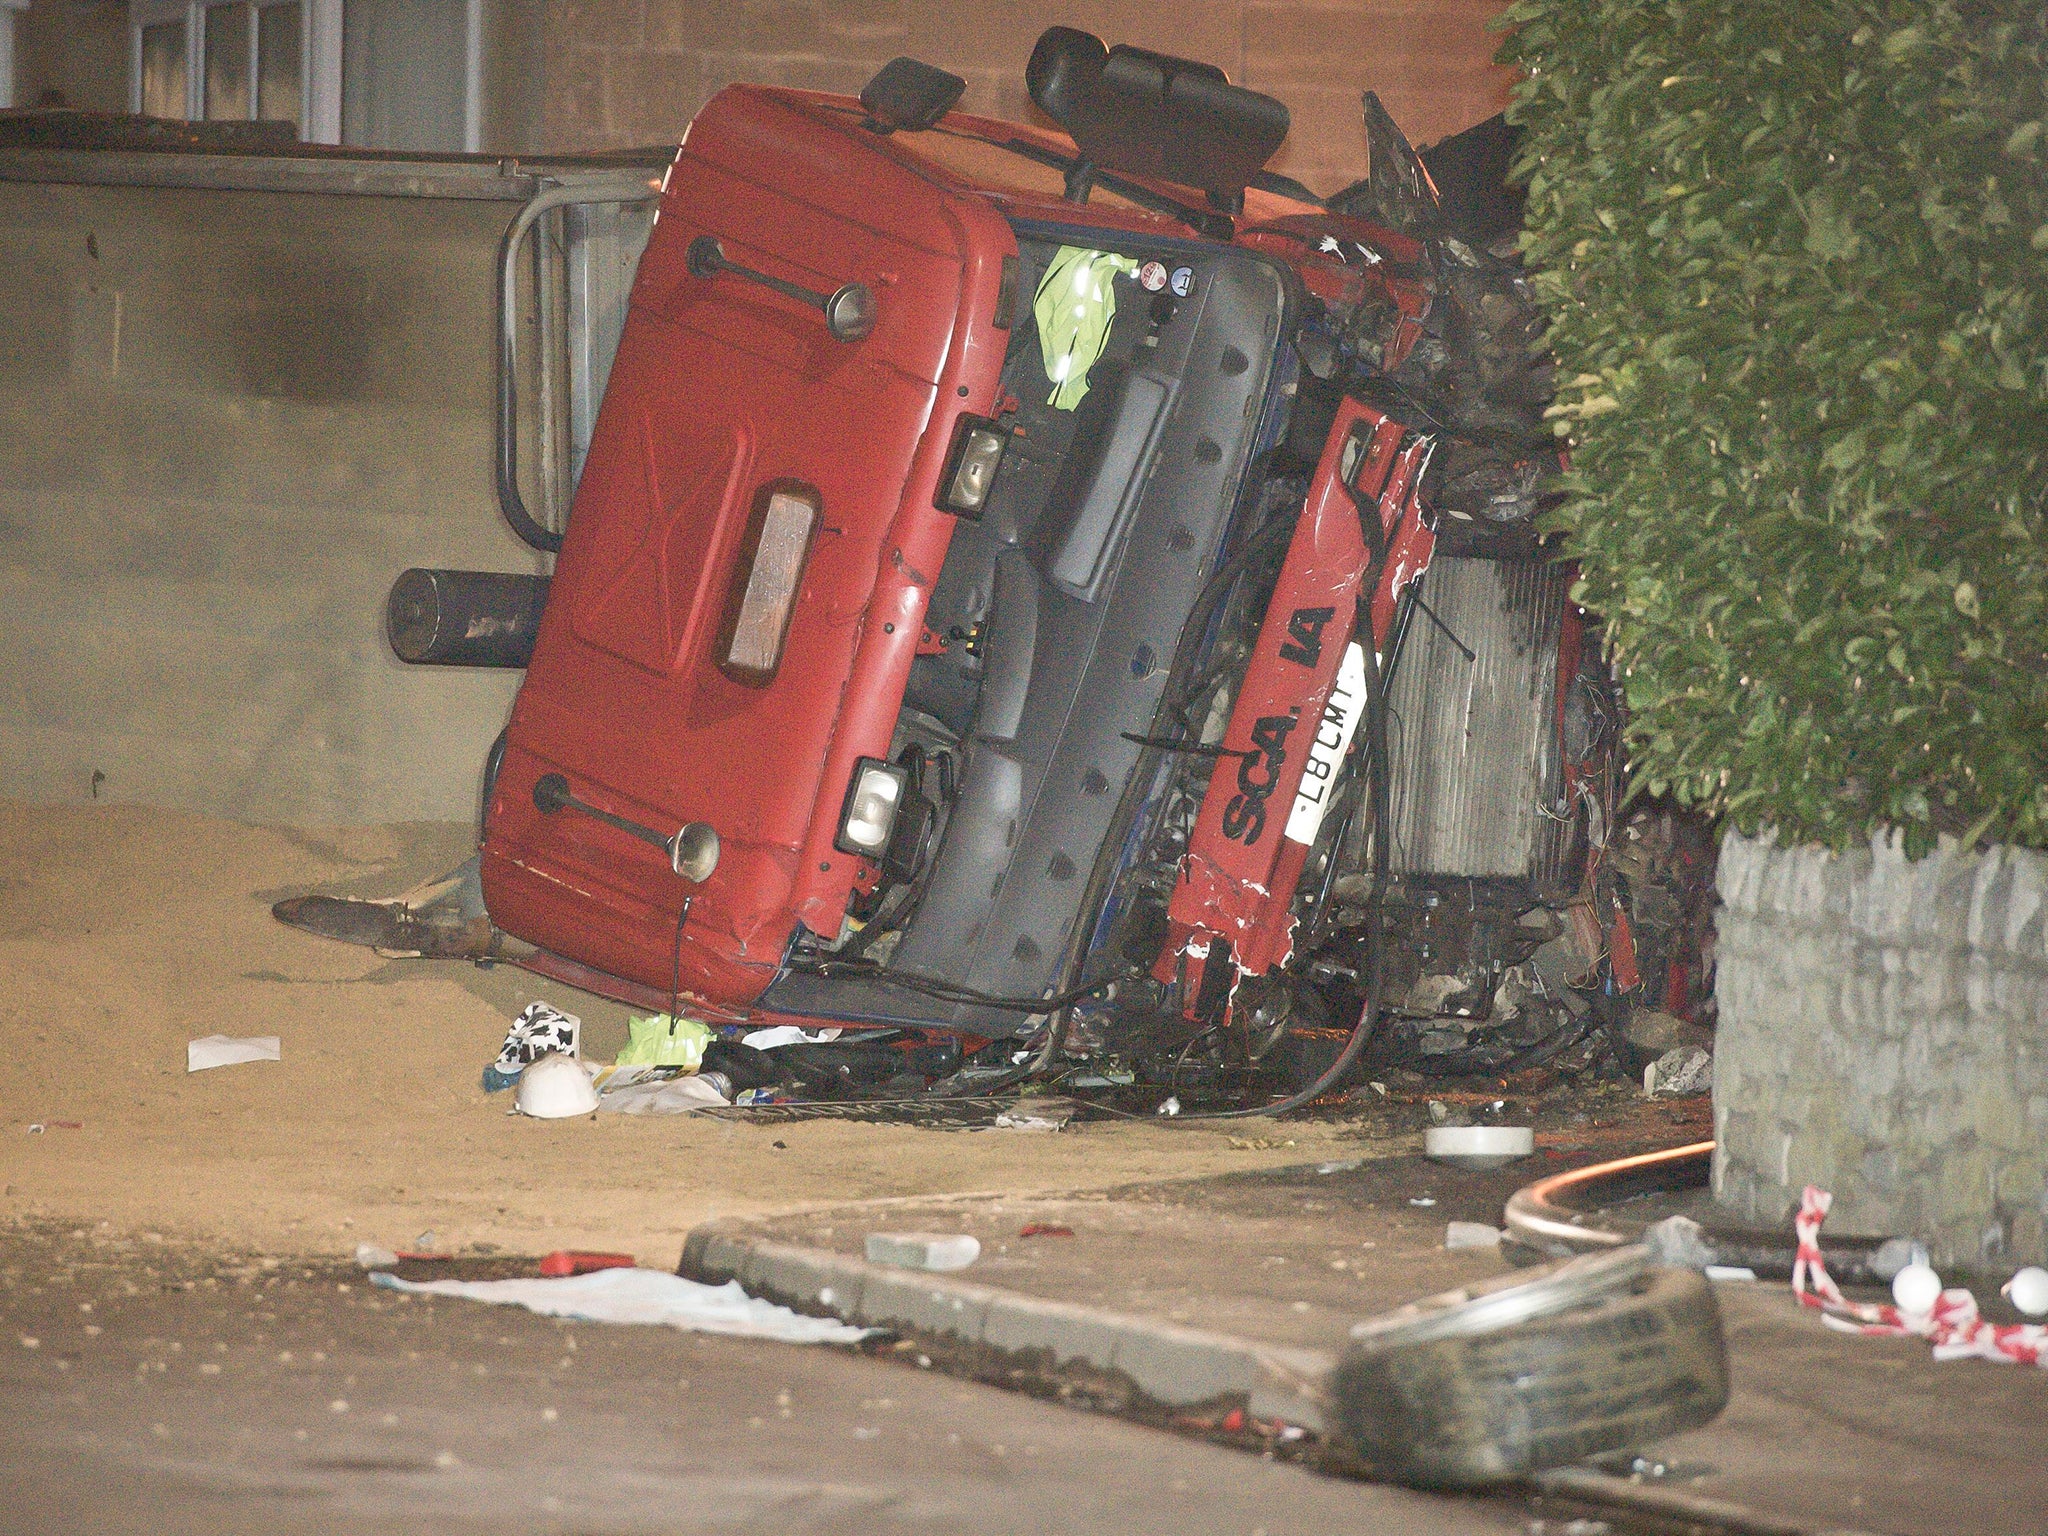 The 32-tonne tipper truck careered out of control down a hill in Bath, killing four people